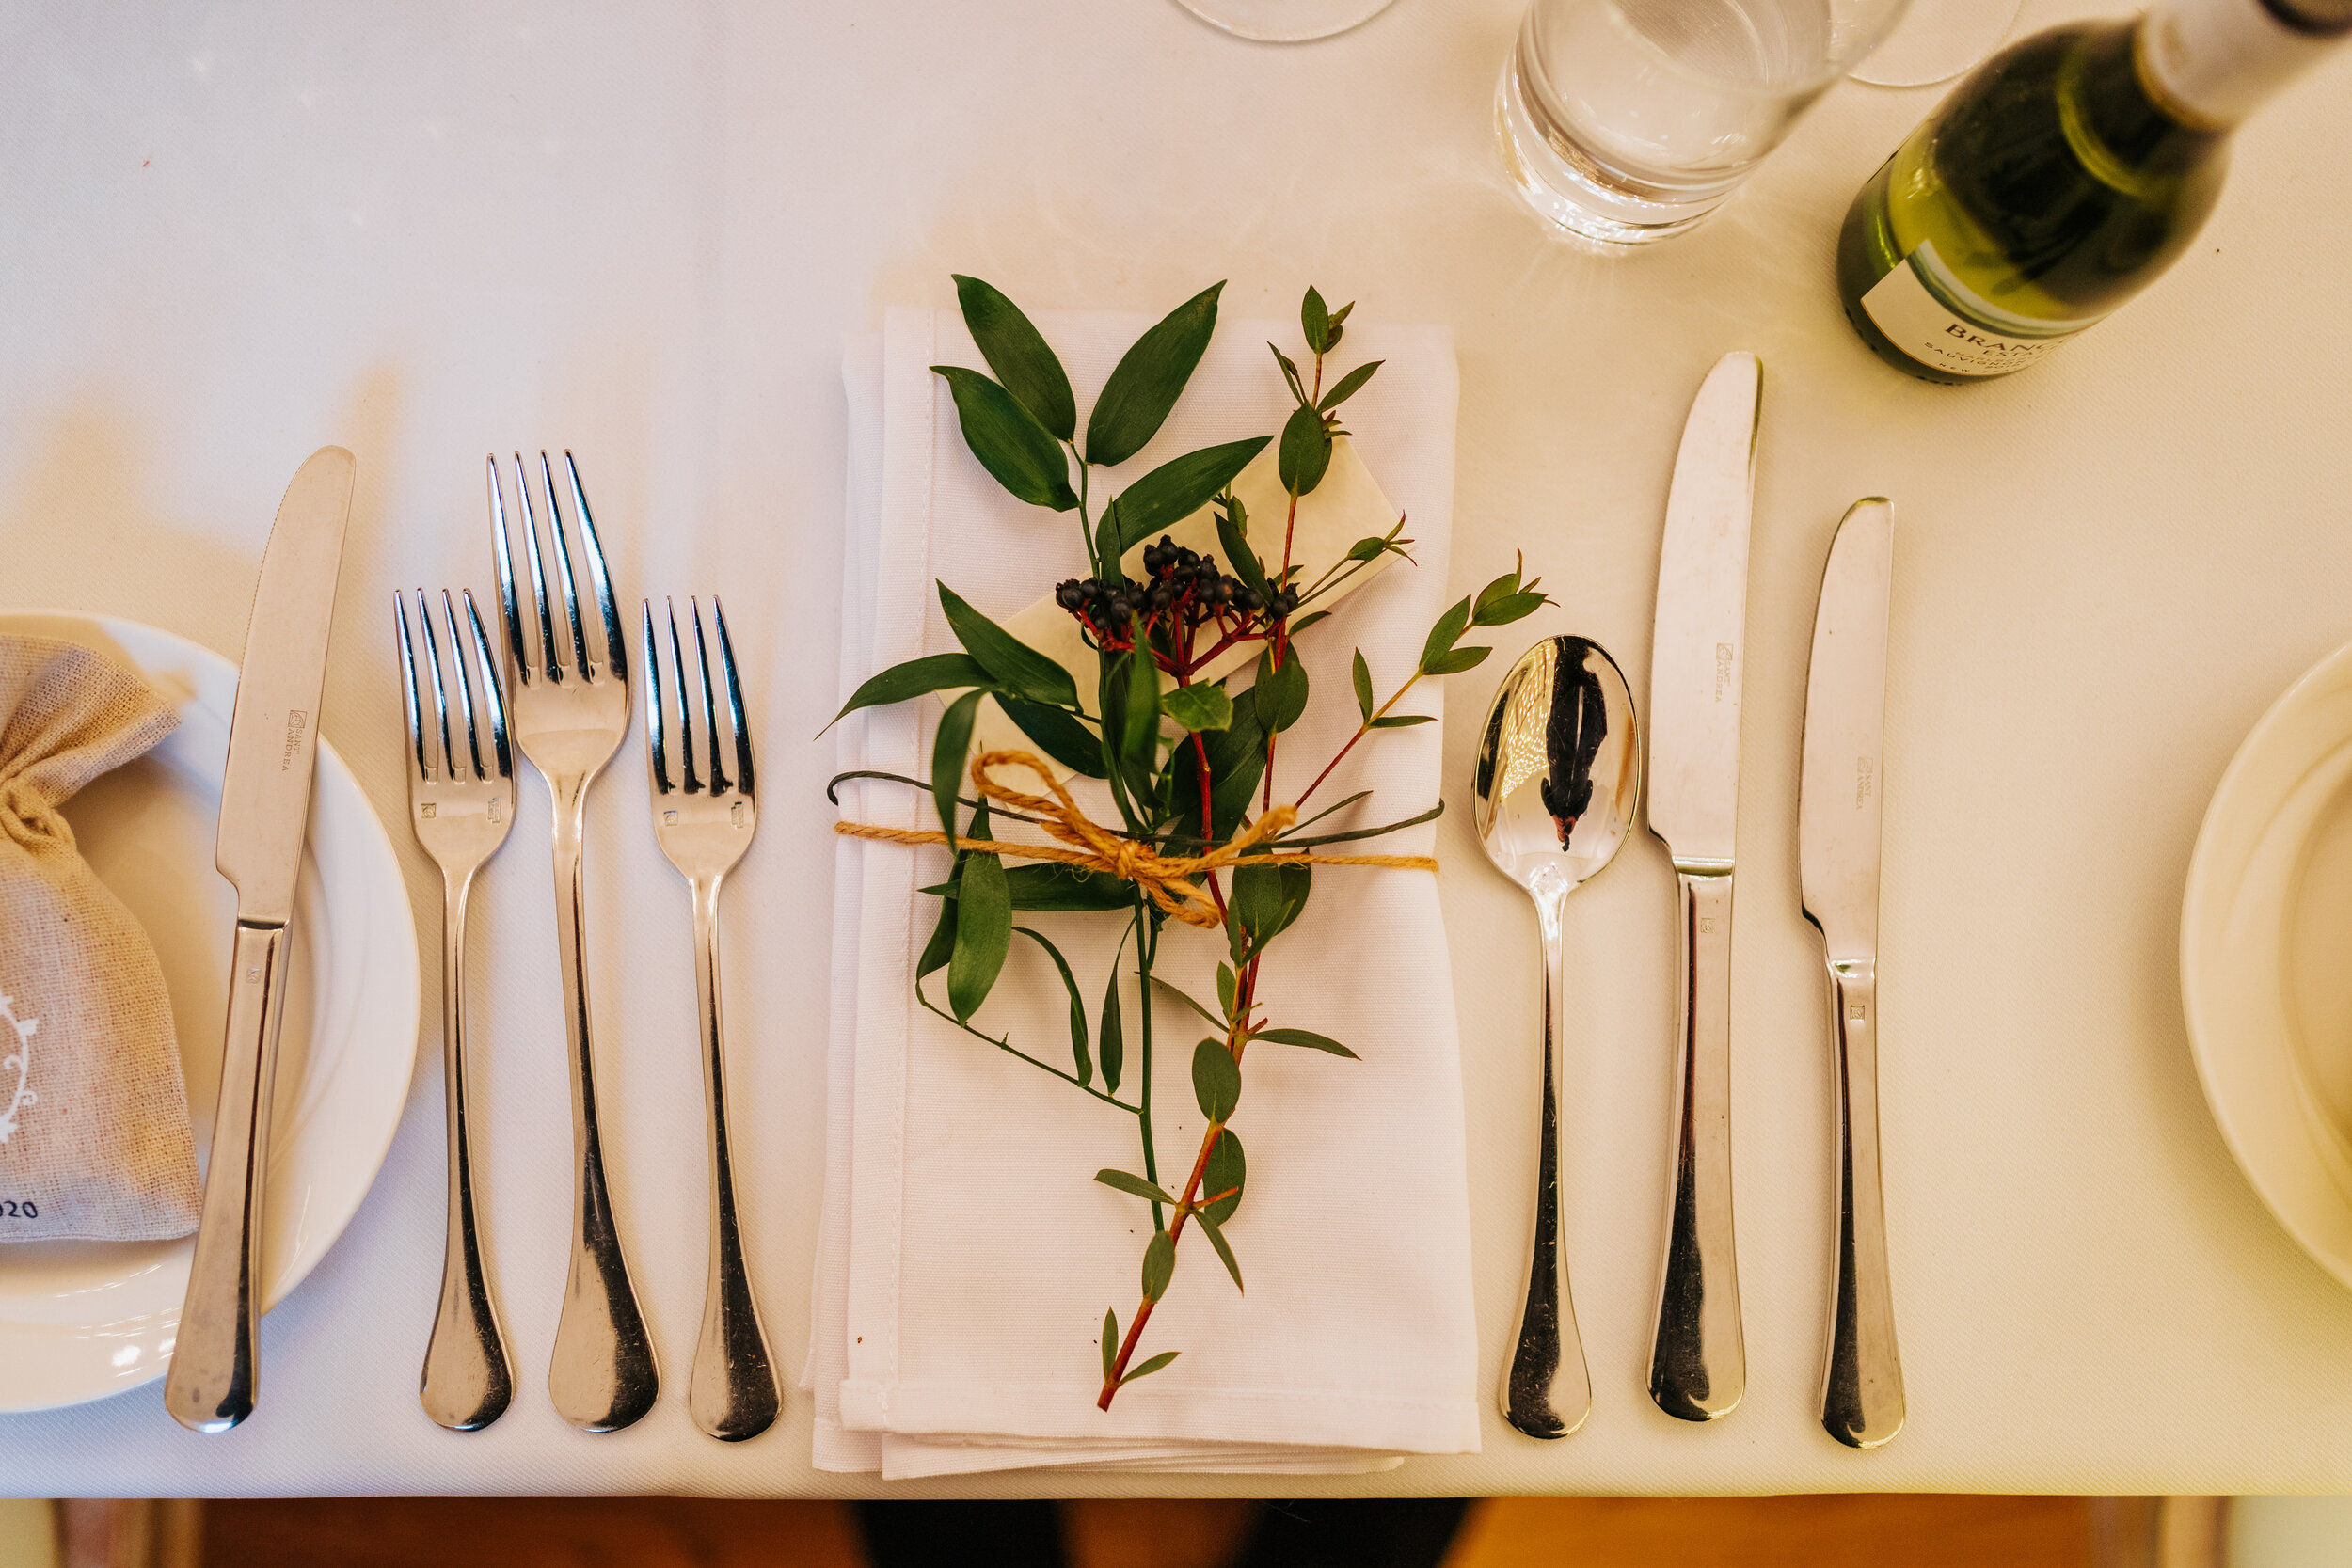 Table setting at Newhall estate with white napkin and sprig of greenery